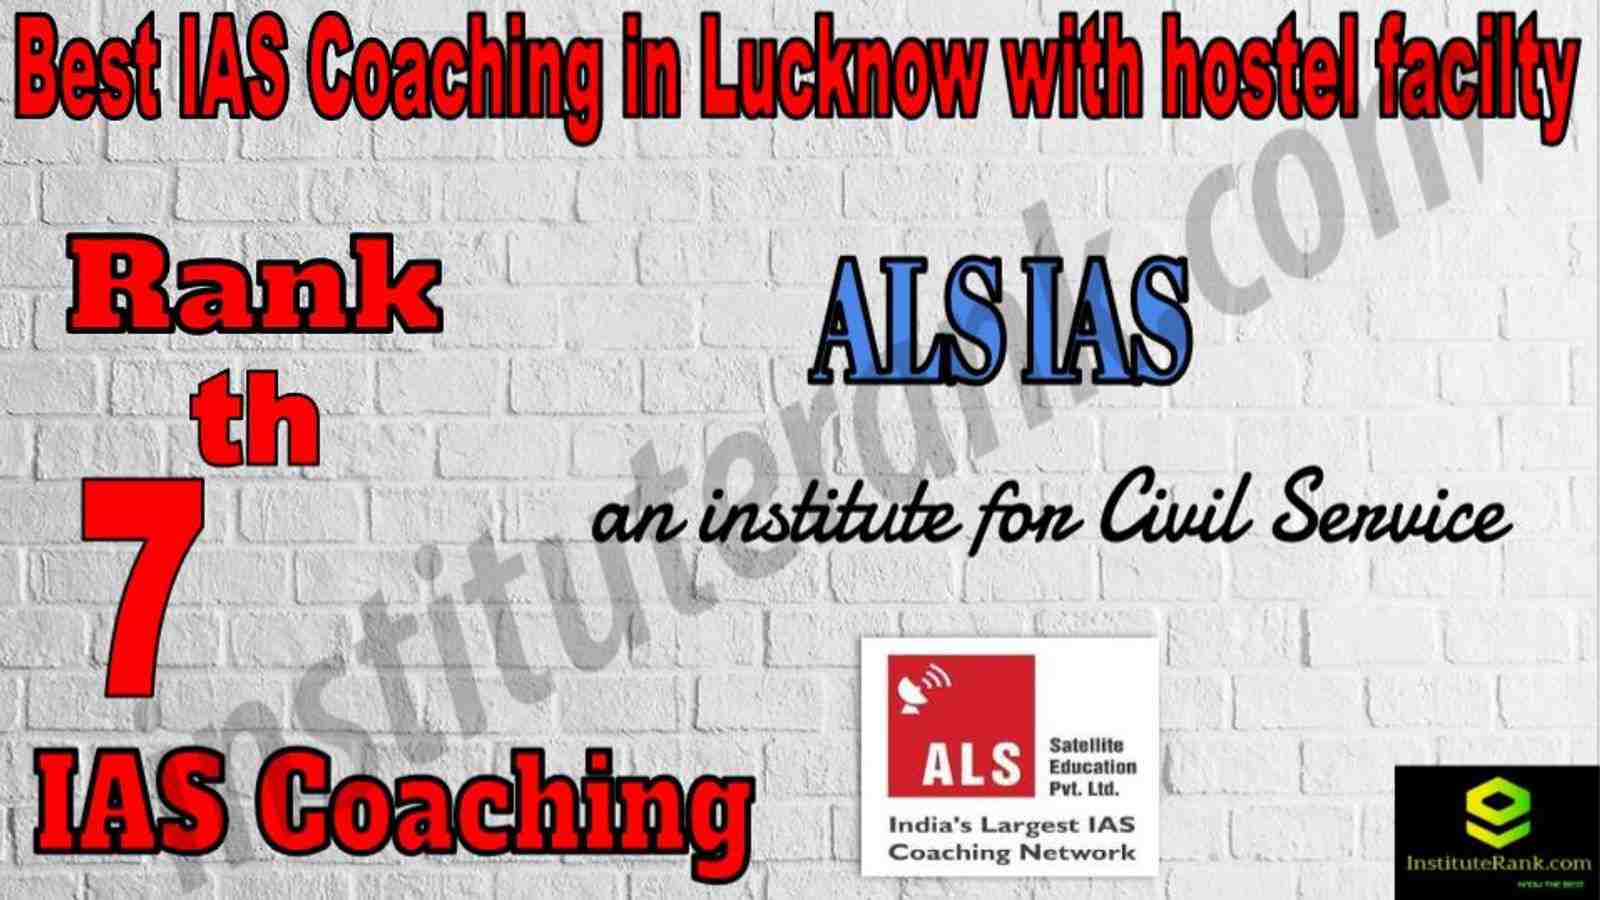 7th Best IAS Coaching in Lucknow With Hostel facility